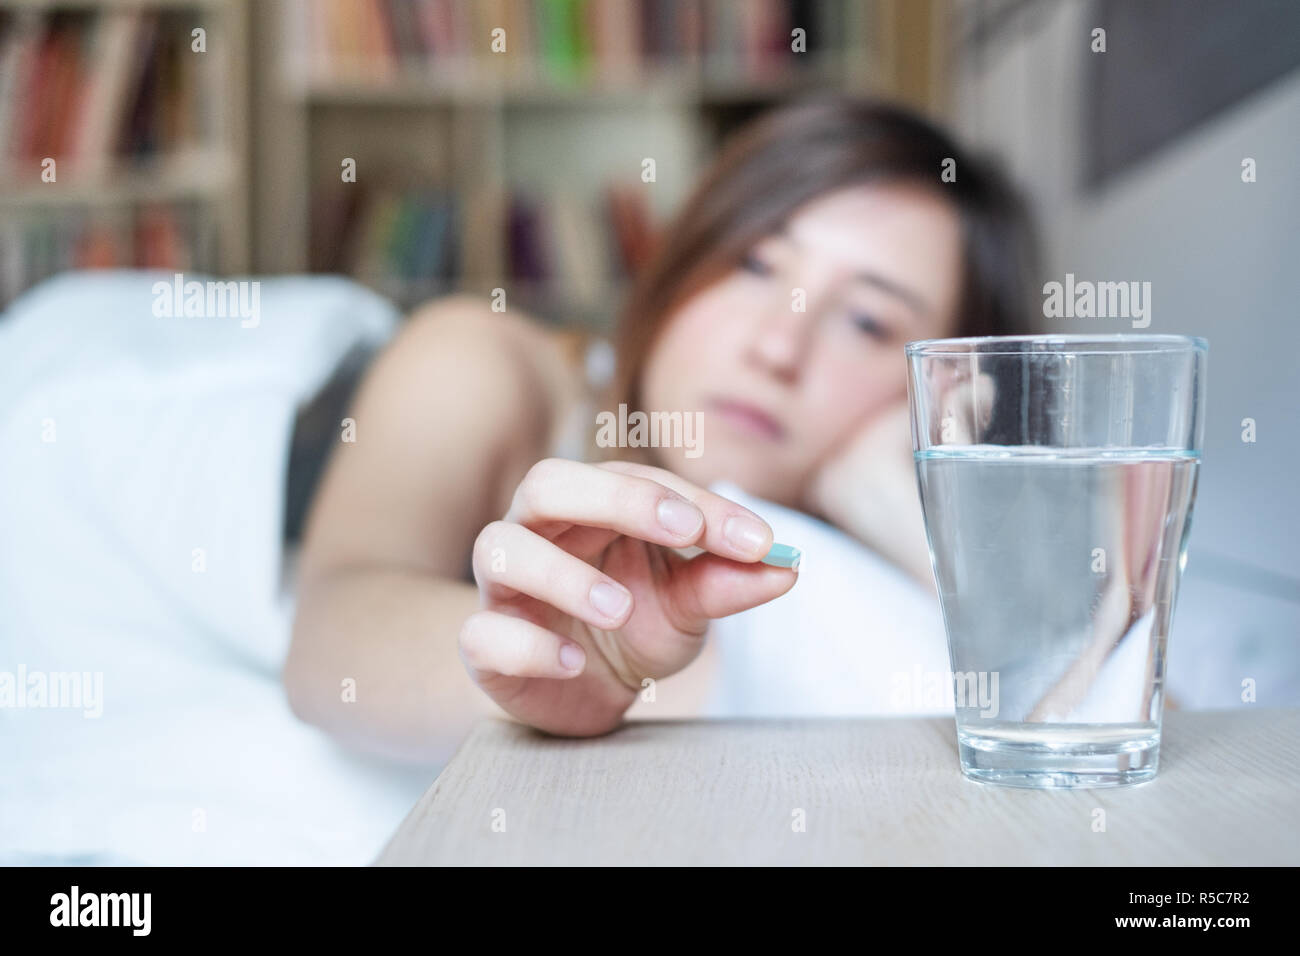 Woman feeling sick and taking medicine pill, focus on the medicine pill Stock Photo